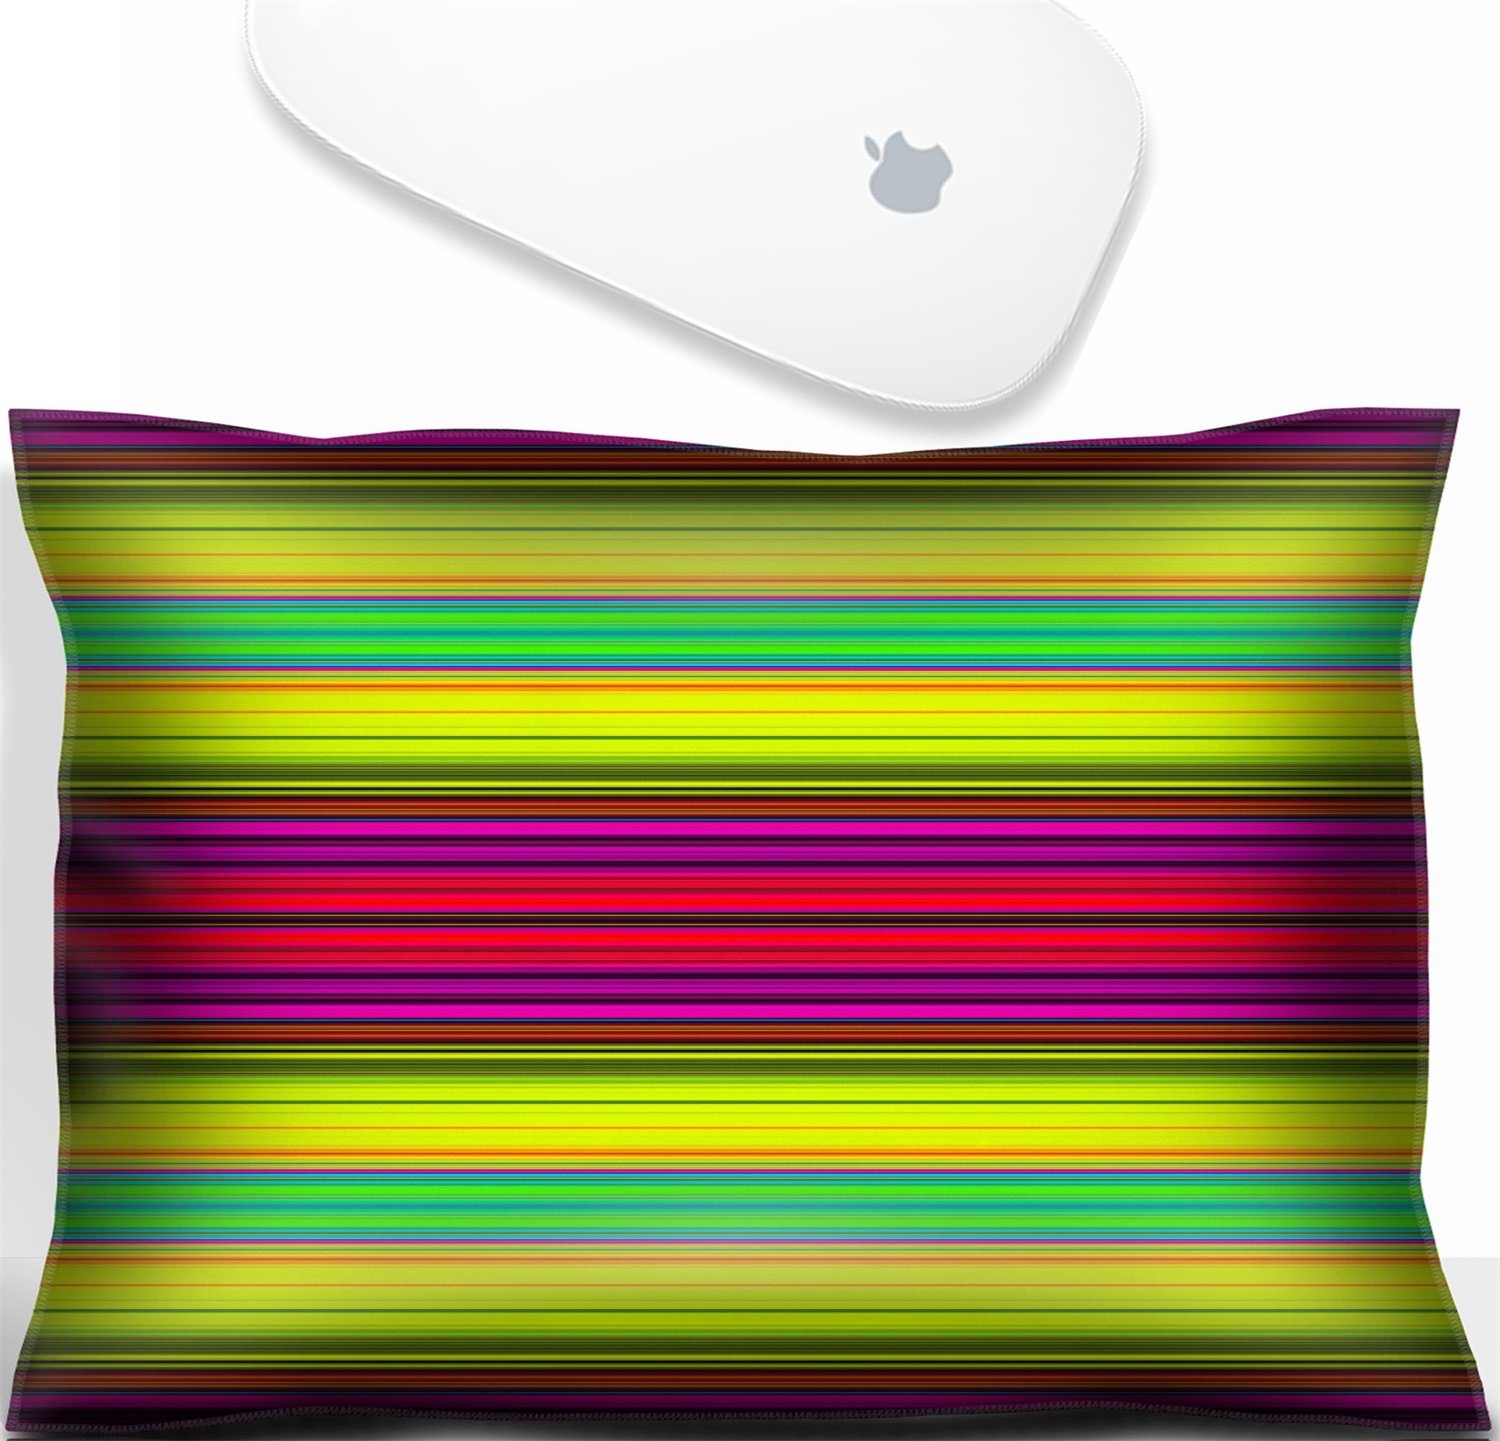 Luxlady Mouse Wrist Rest Office Decor Wrist Supporter - Cushion , HD Wallpaper & Backgrounds